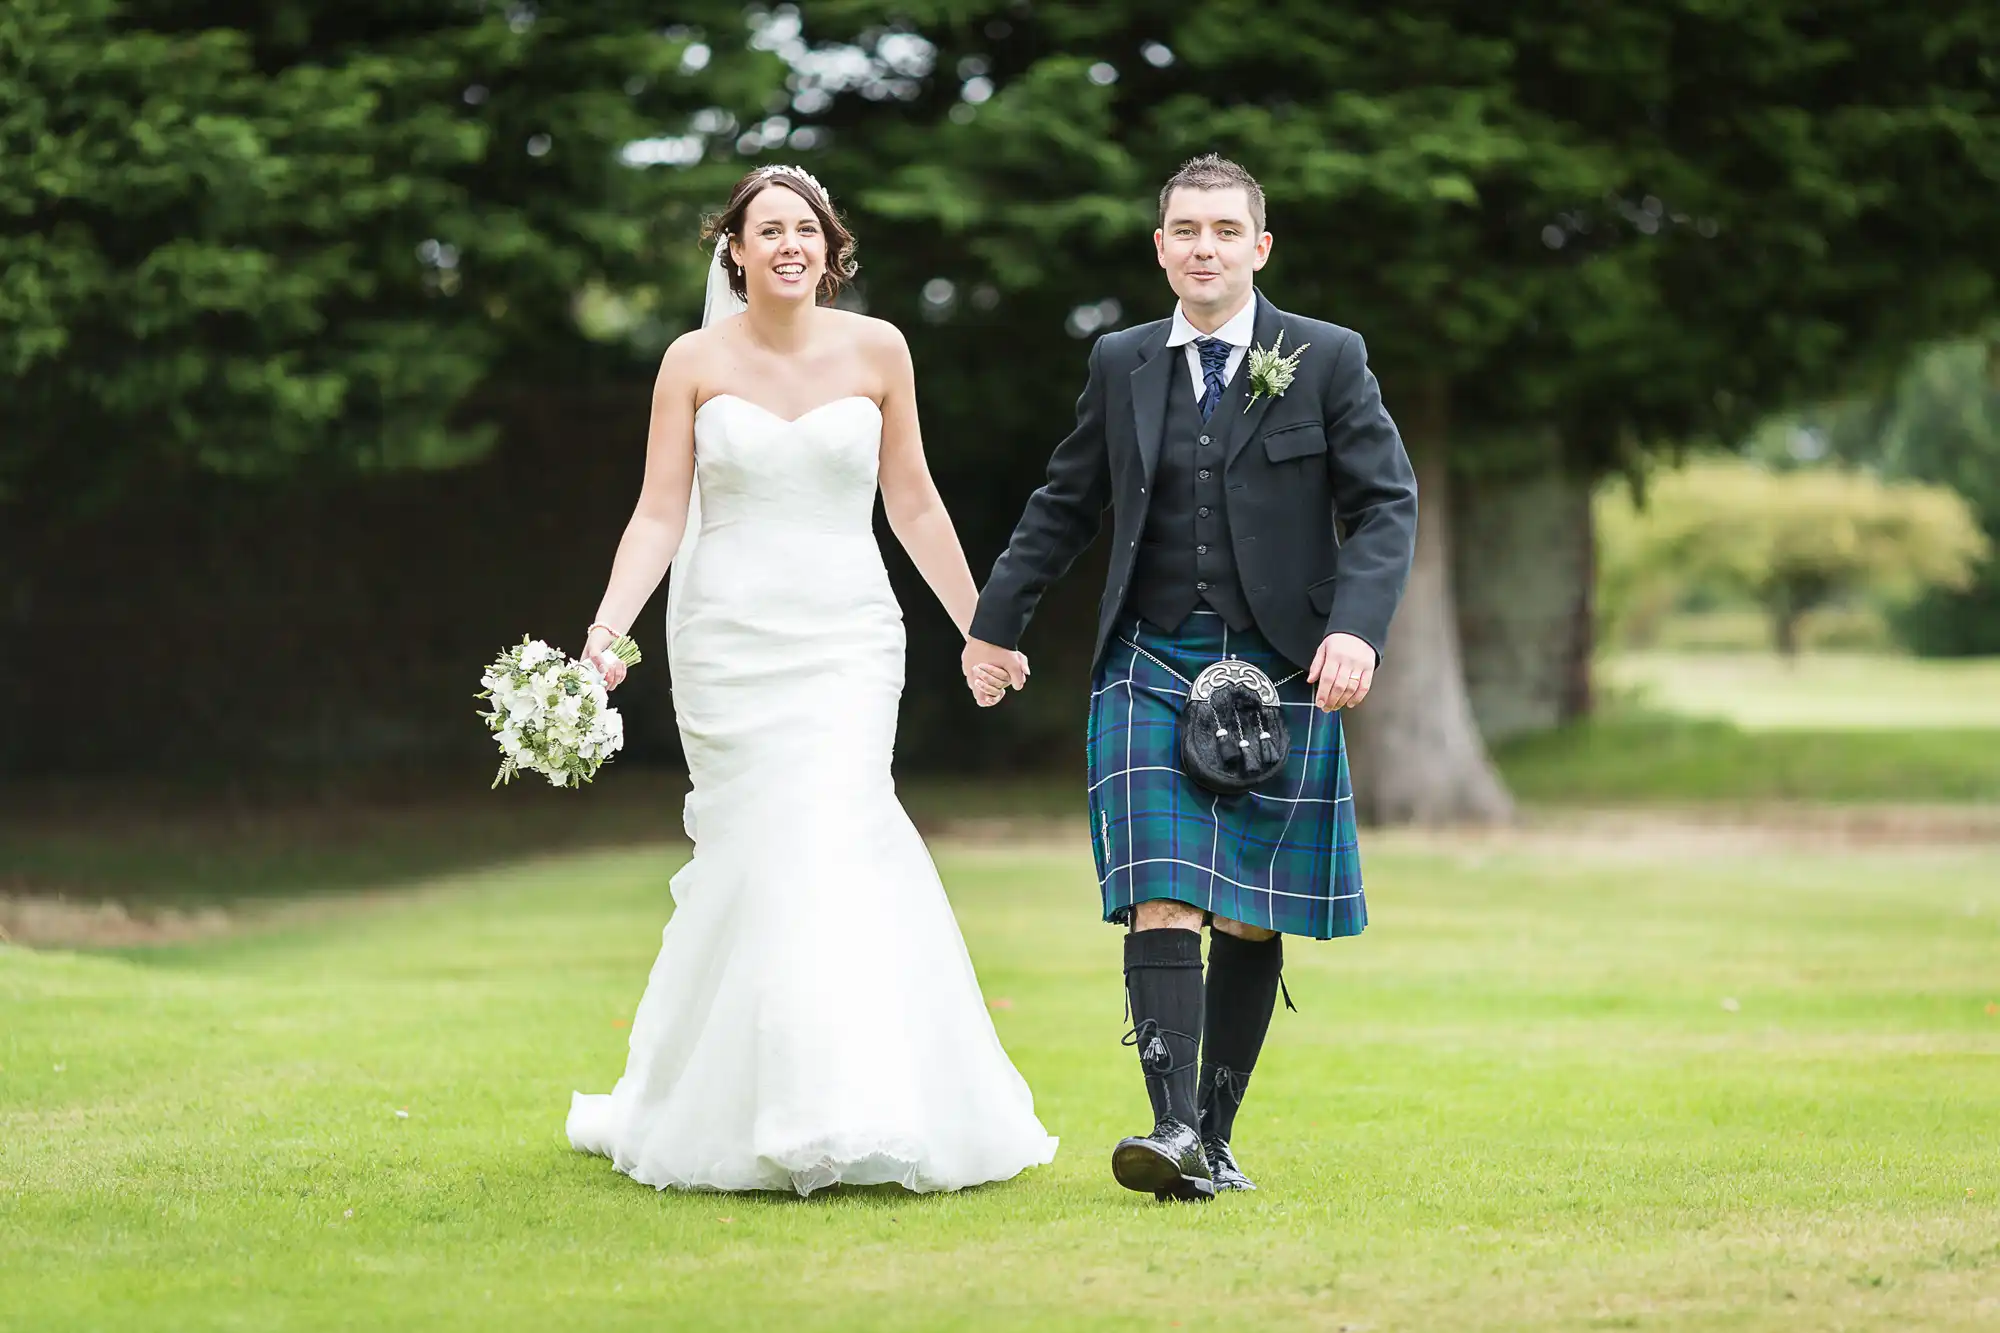 Bride in a white dress and groom in a kilt walking on grass, smiling, with trees in the background.